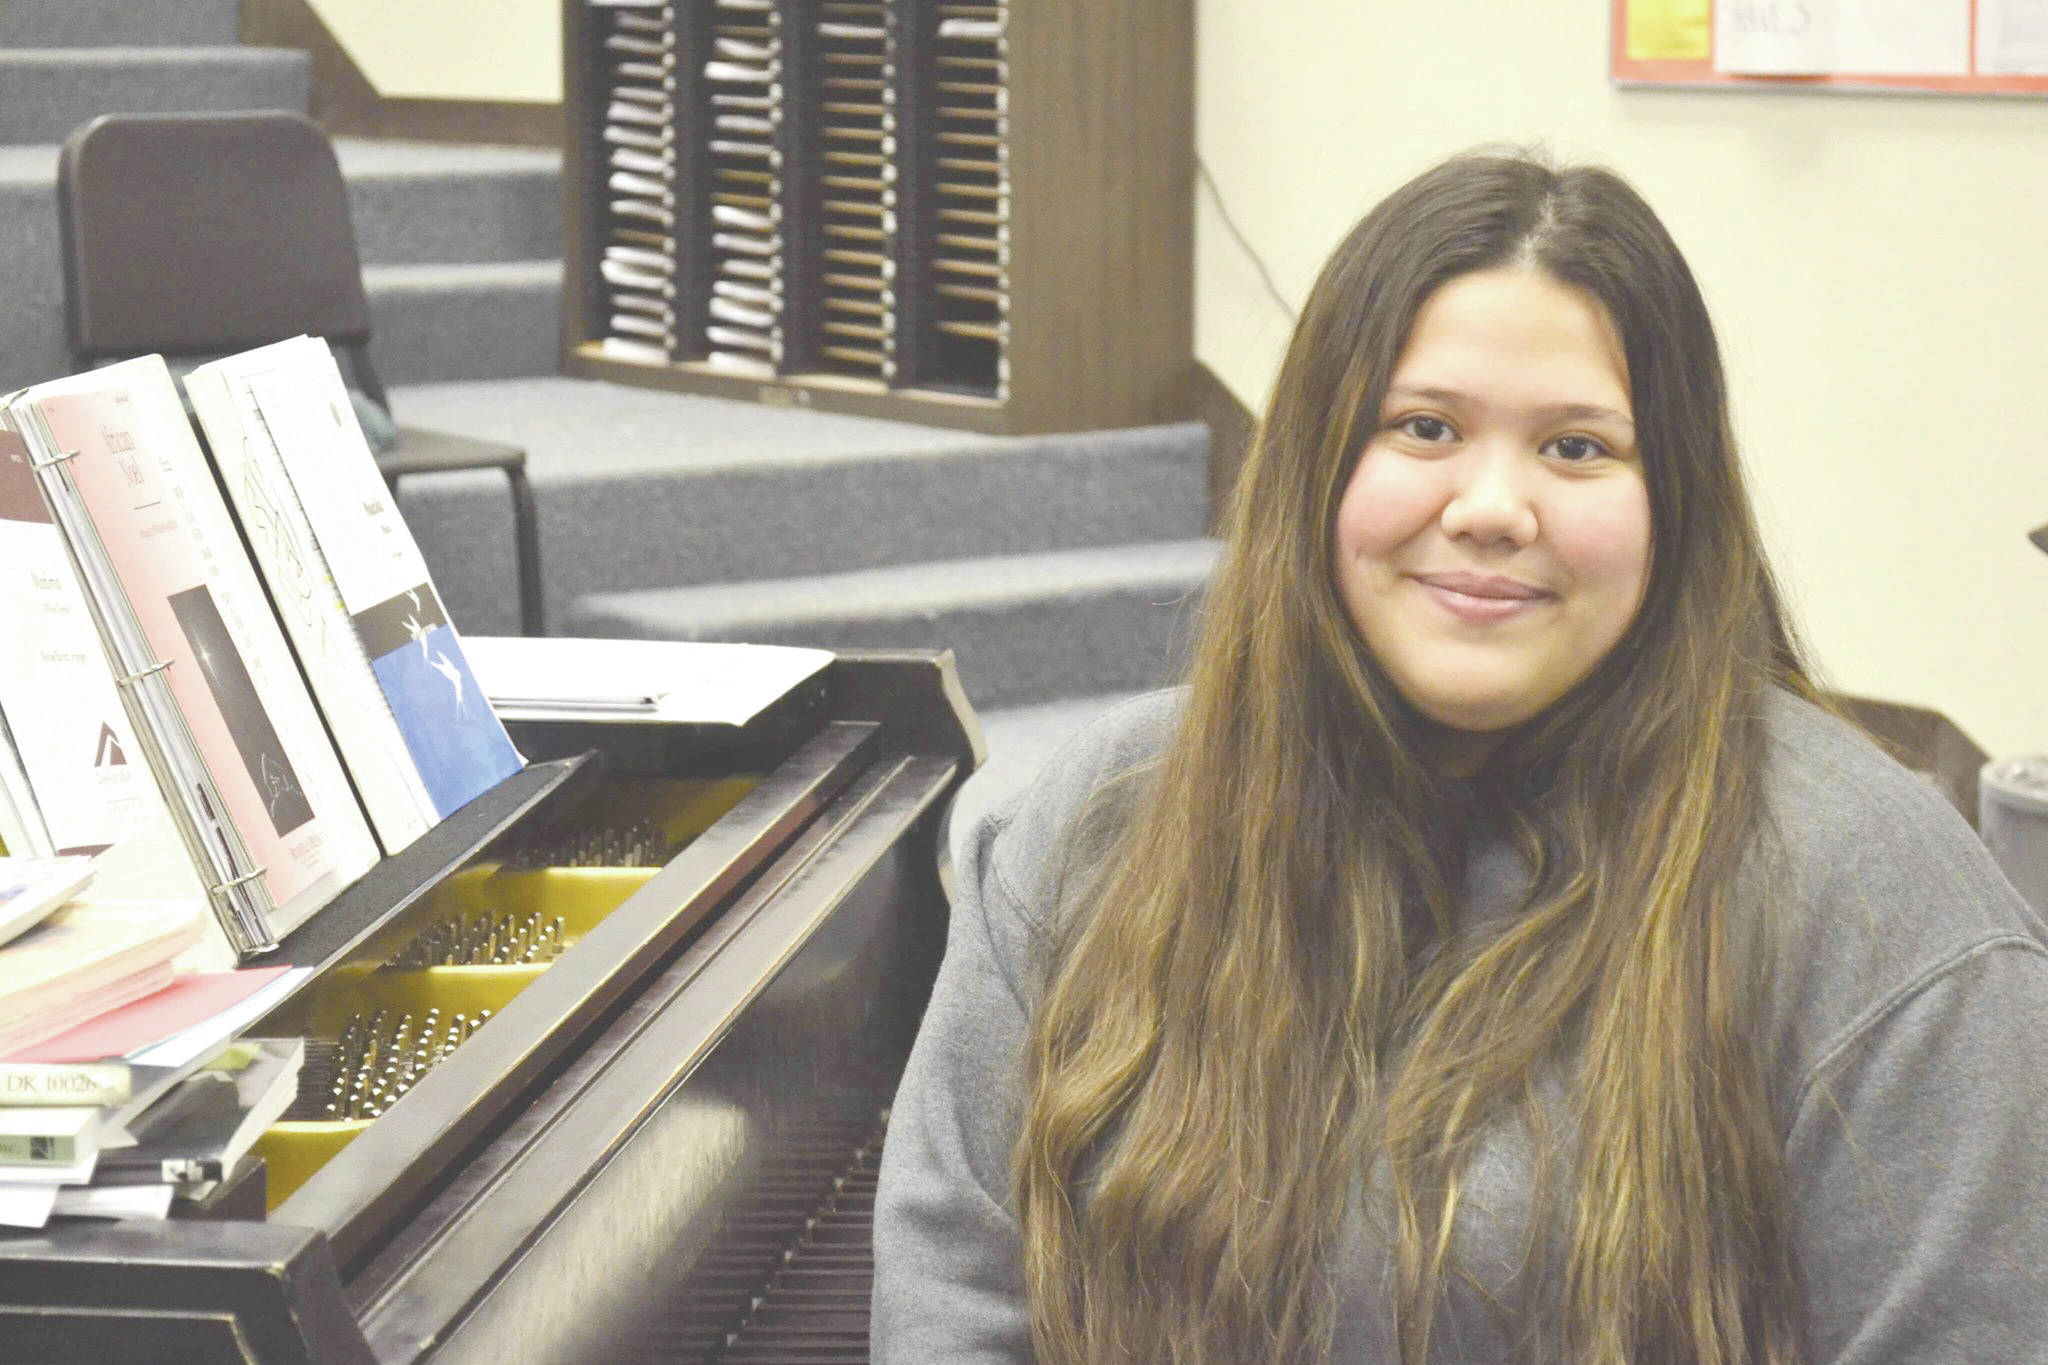 Victoria Petersen / Peninsula Clarion                                Rowan Vasquez, a senior at Soldotna High School, is pictured Tuesday in Soldotna. Vasquez will be representing the Kenai Peninsula when she attends the National Association for Music Education 2019 All-National Honor Ensemble in Florida this week.